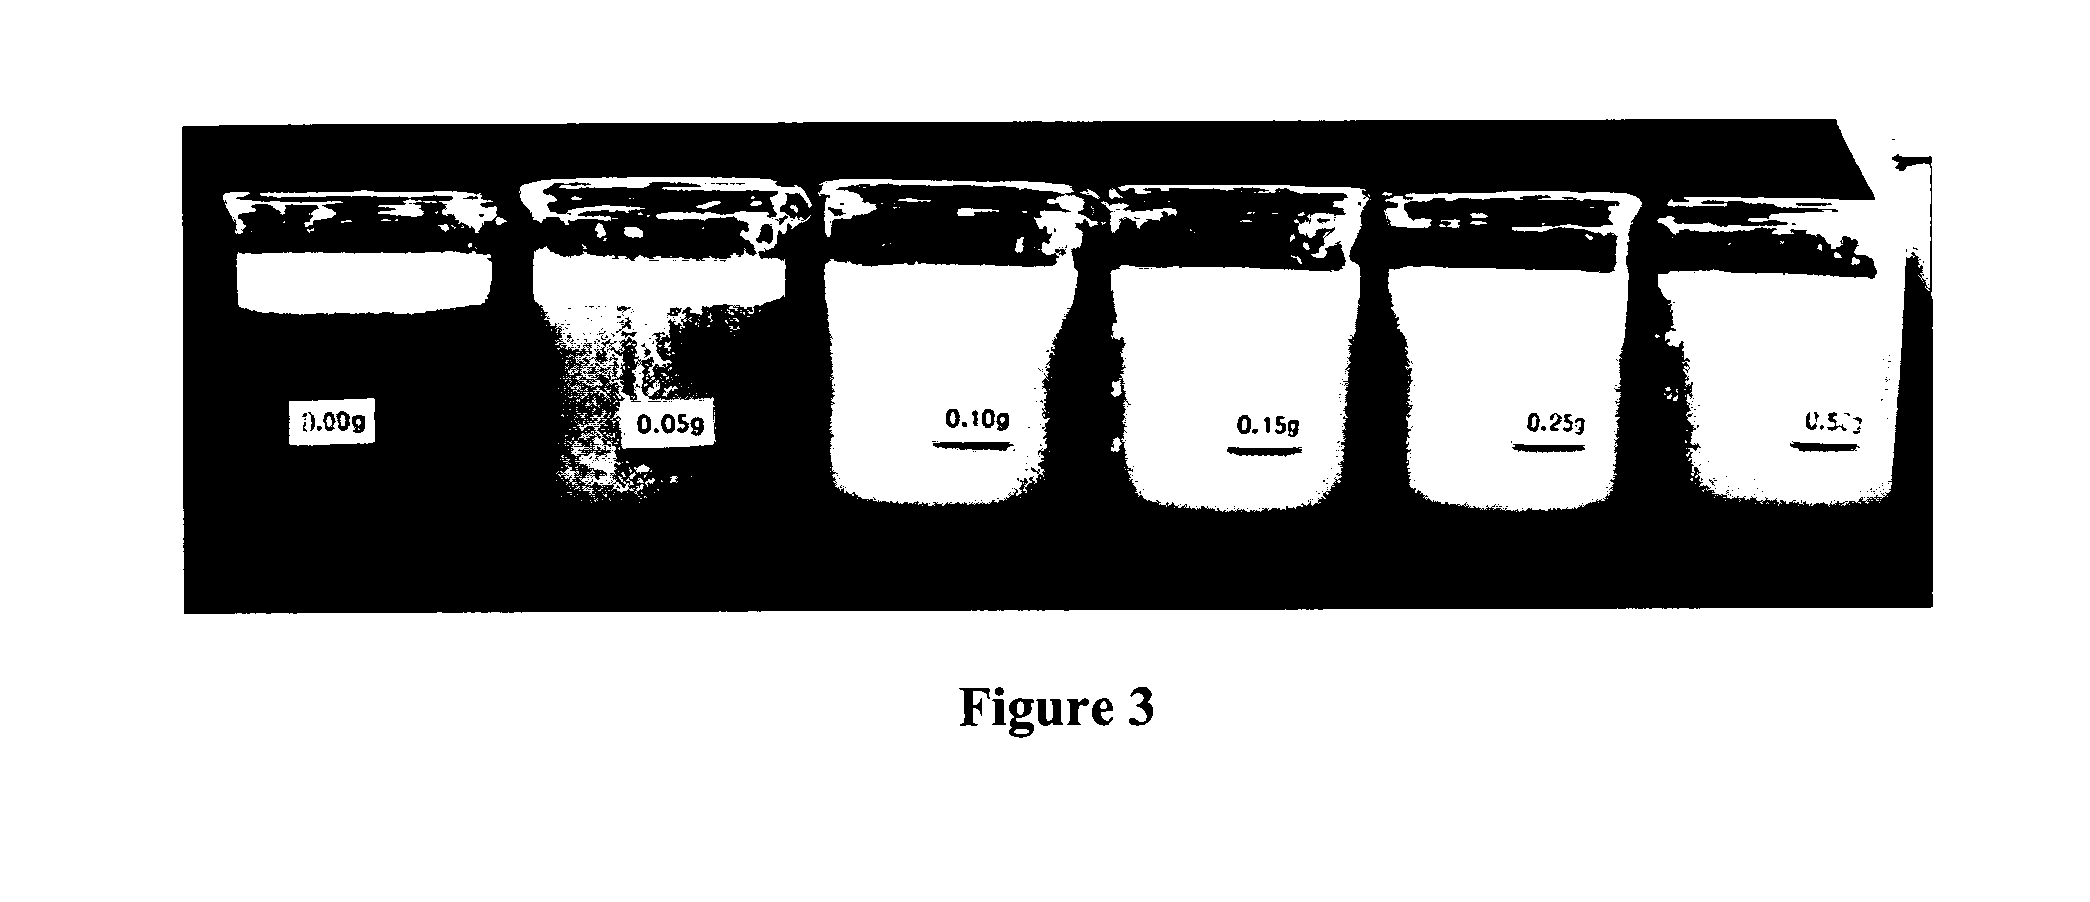 Low protein and protein-free extended shelf life (ESL) and shelf-stable aseptic liquid creamers and process of making thereof